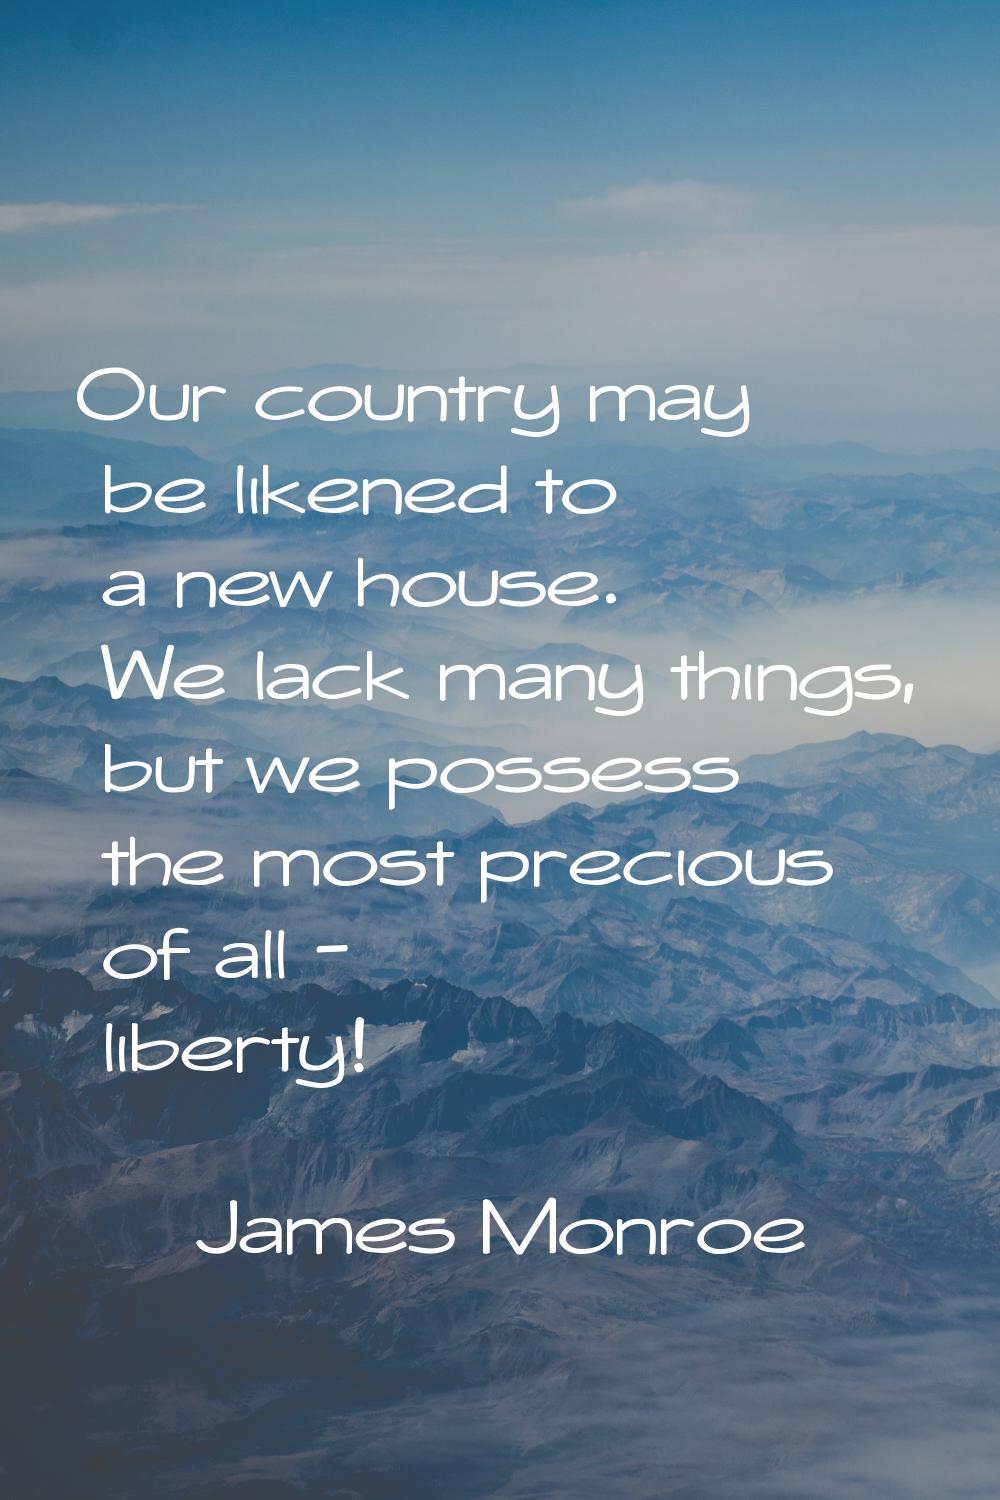 Our country may be likened to a new house. We lack many things, but we possess the most precious of